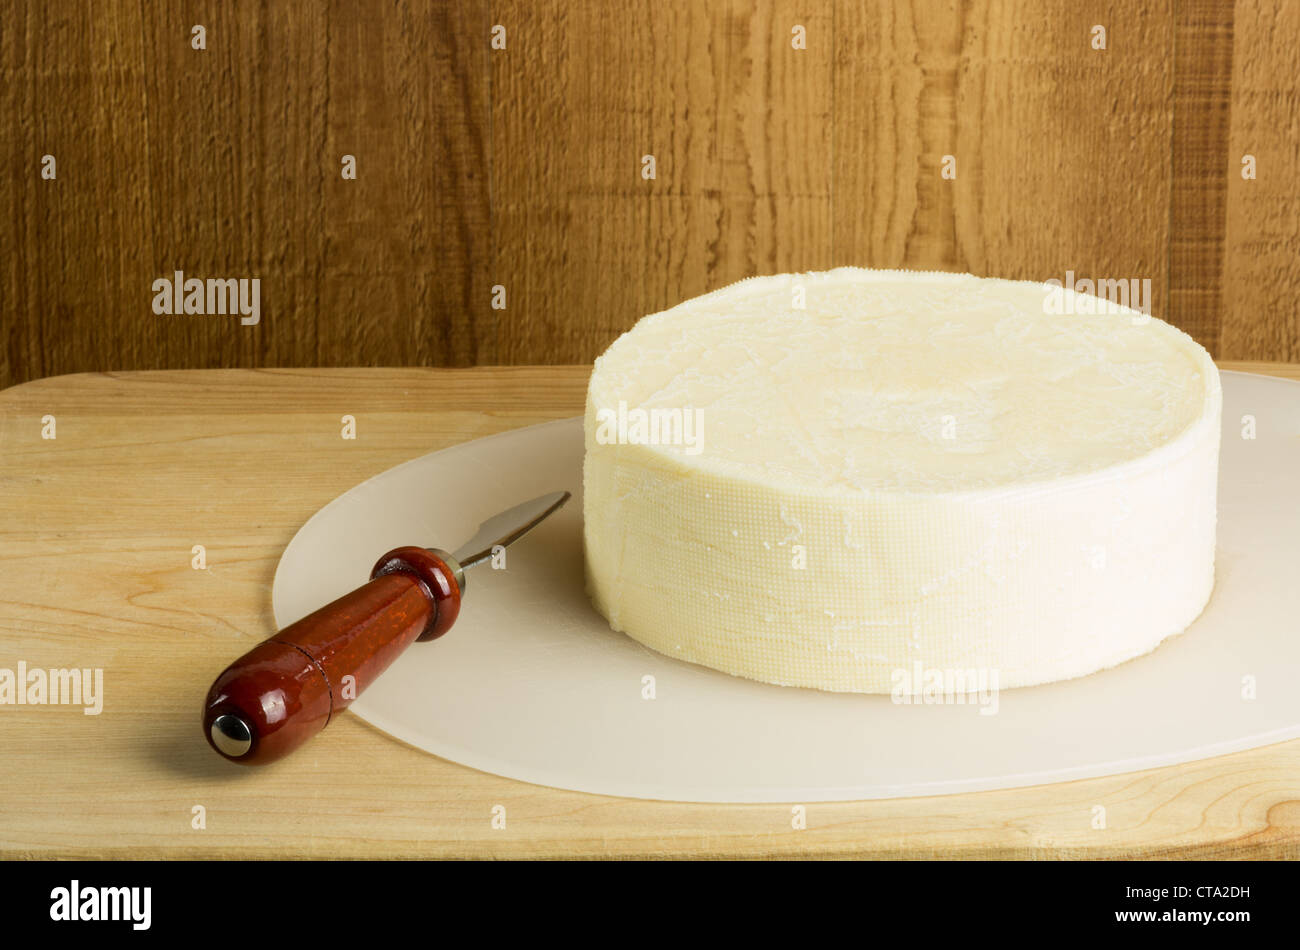 A round block of white cheddar cheese with a knife Stock Photo